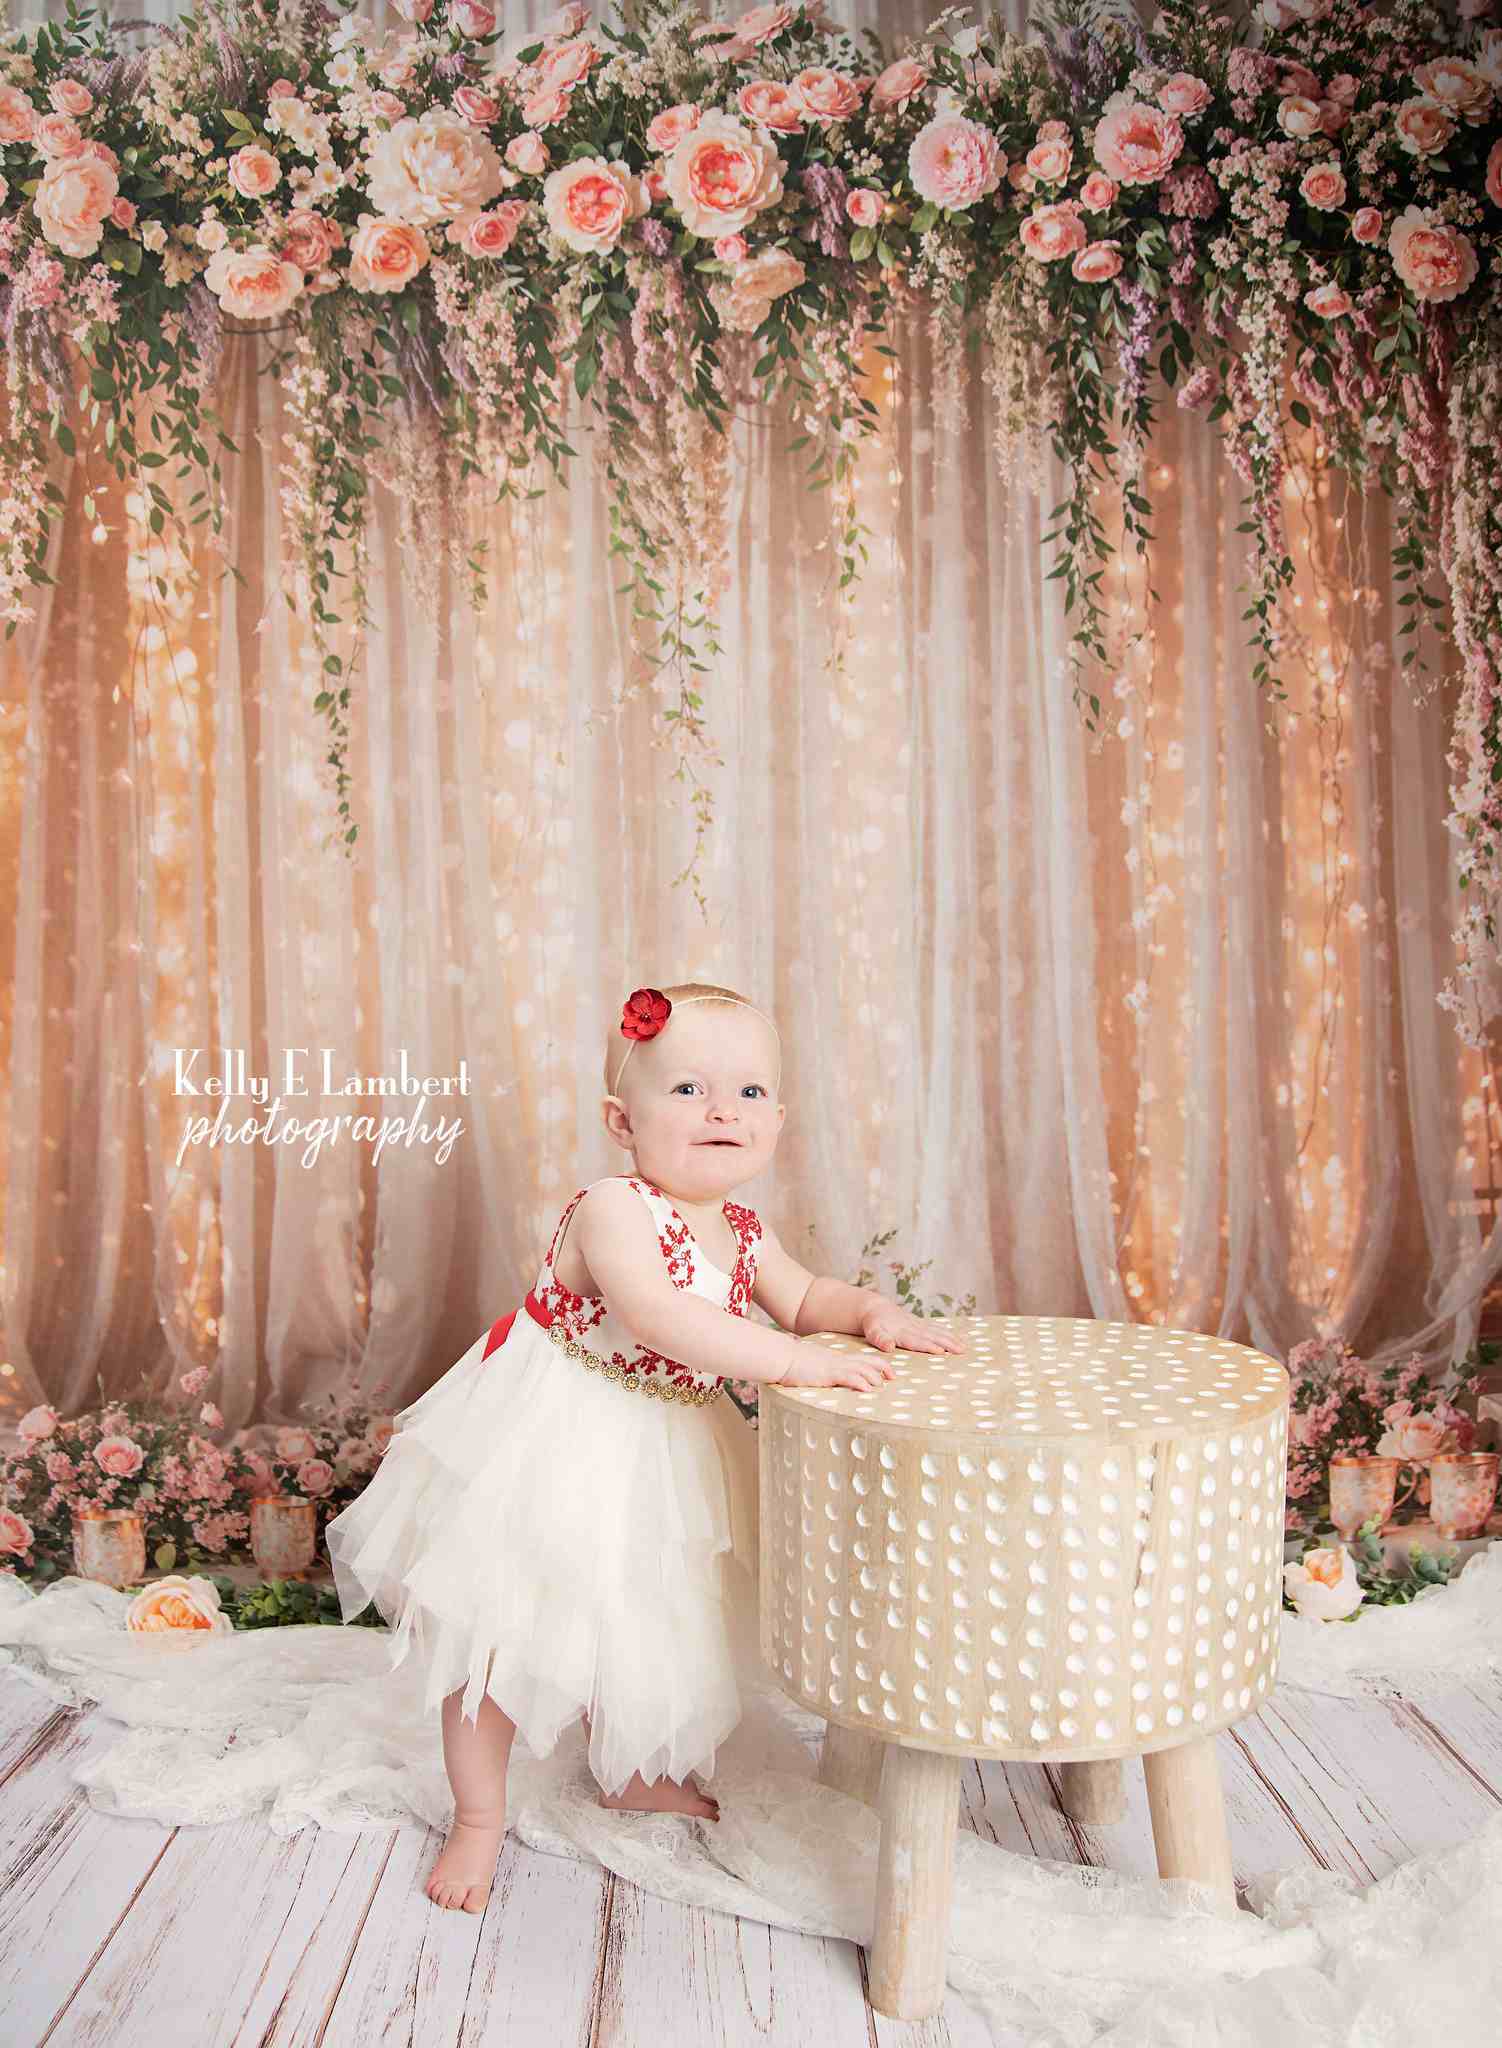 Kate Flower Light String Curtain Backdrop Designed by Chain Photography